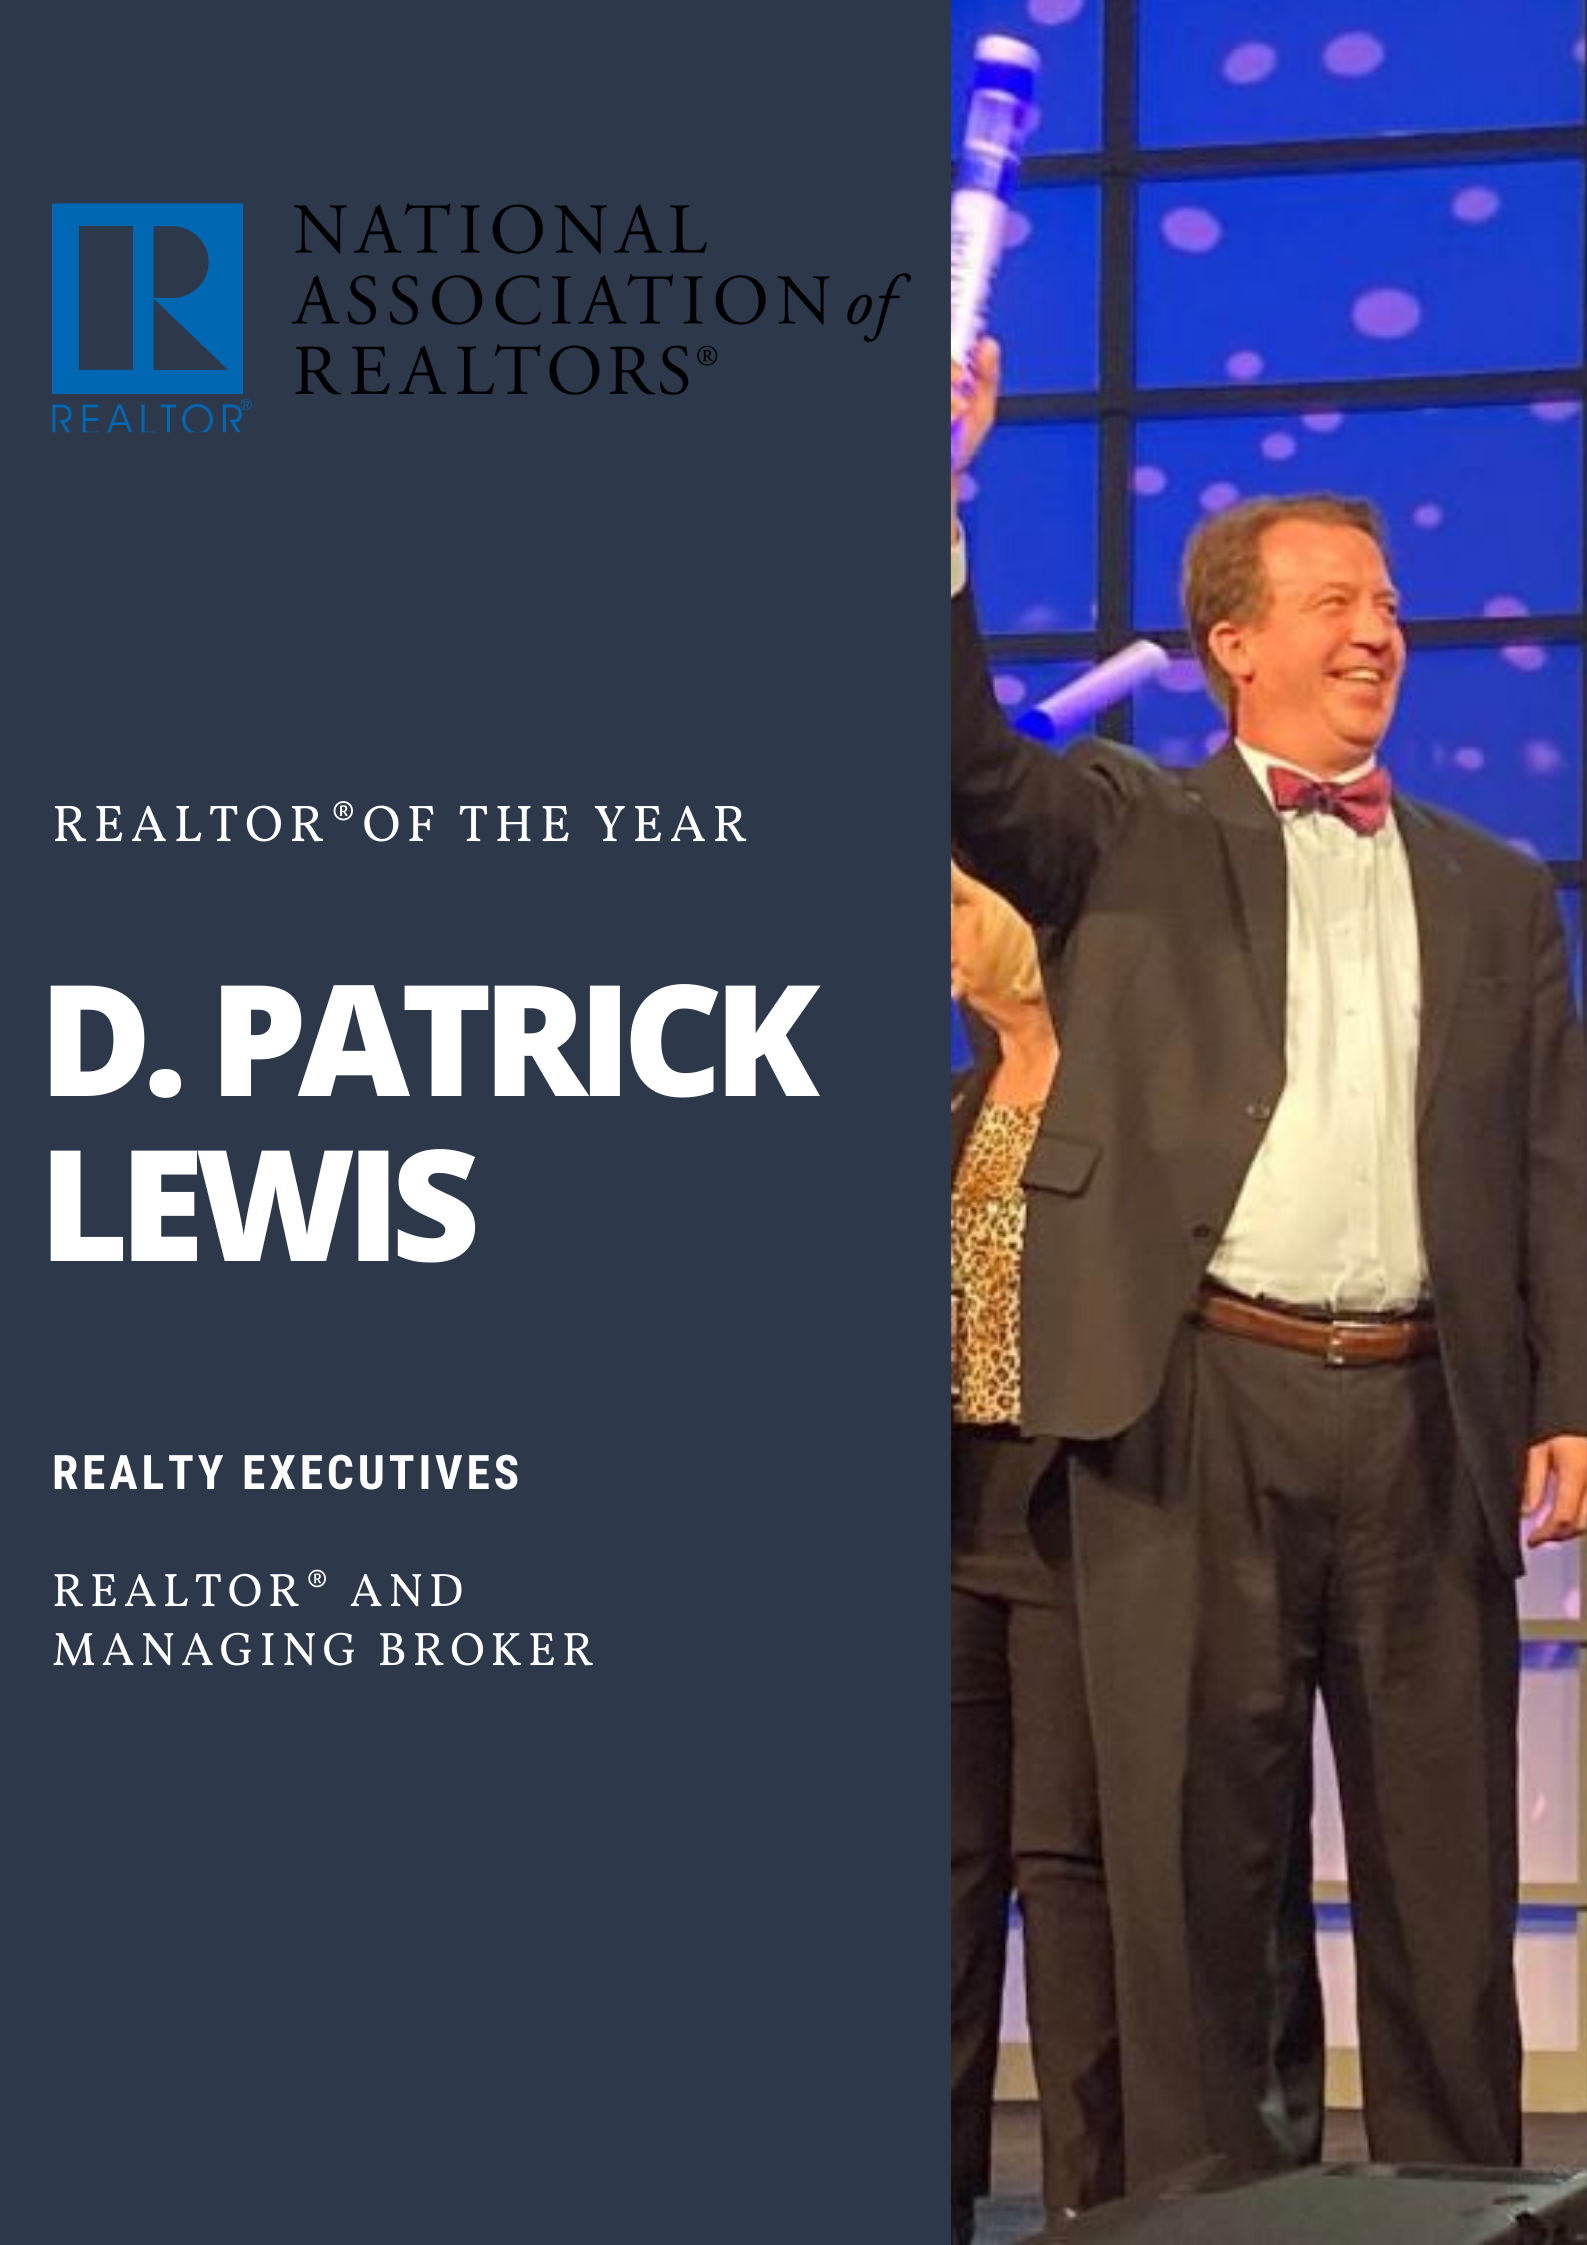  REALTOR® of the Year  